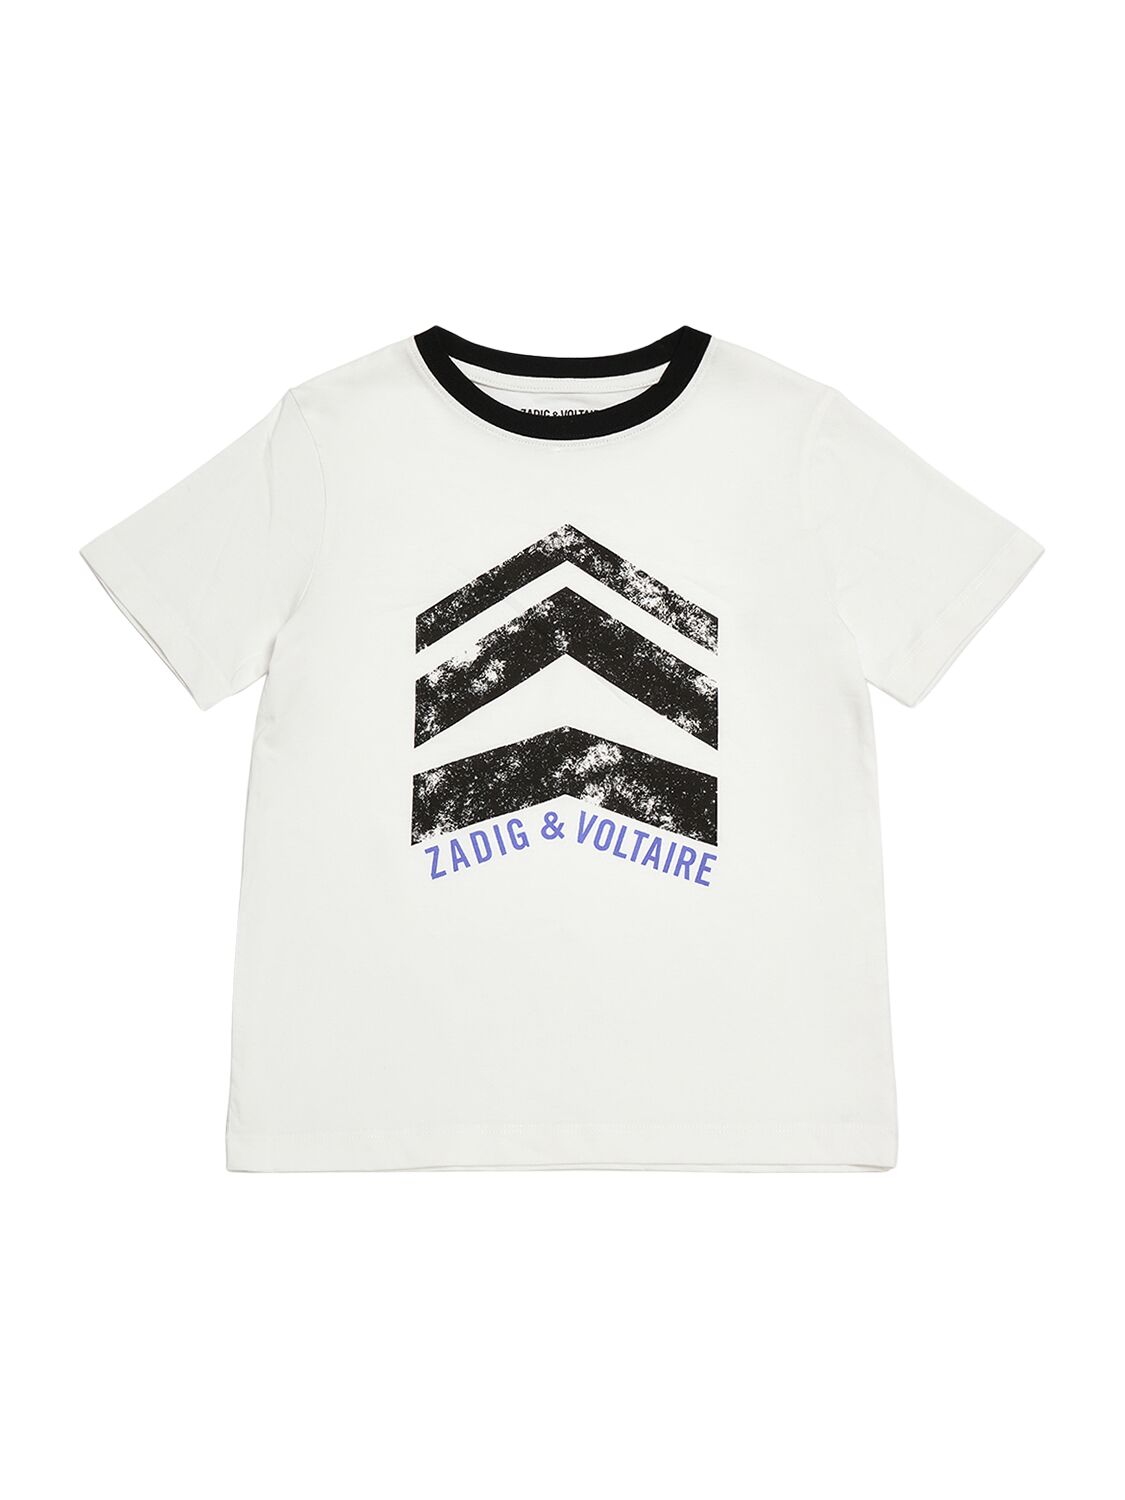 Zadig & Voltaire Kids' Printed Organic Cotton T-shirt In White